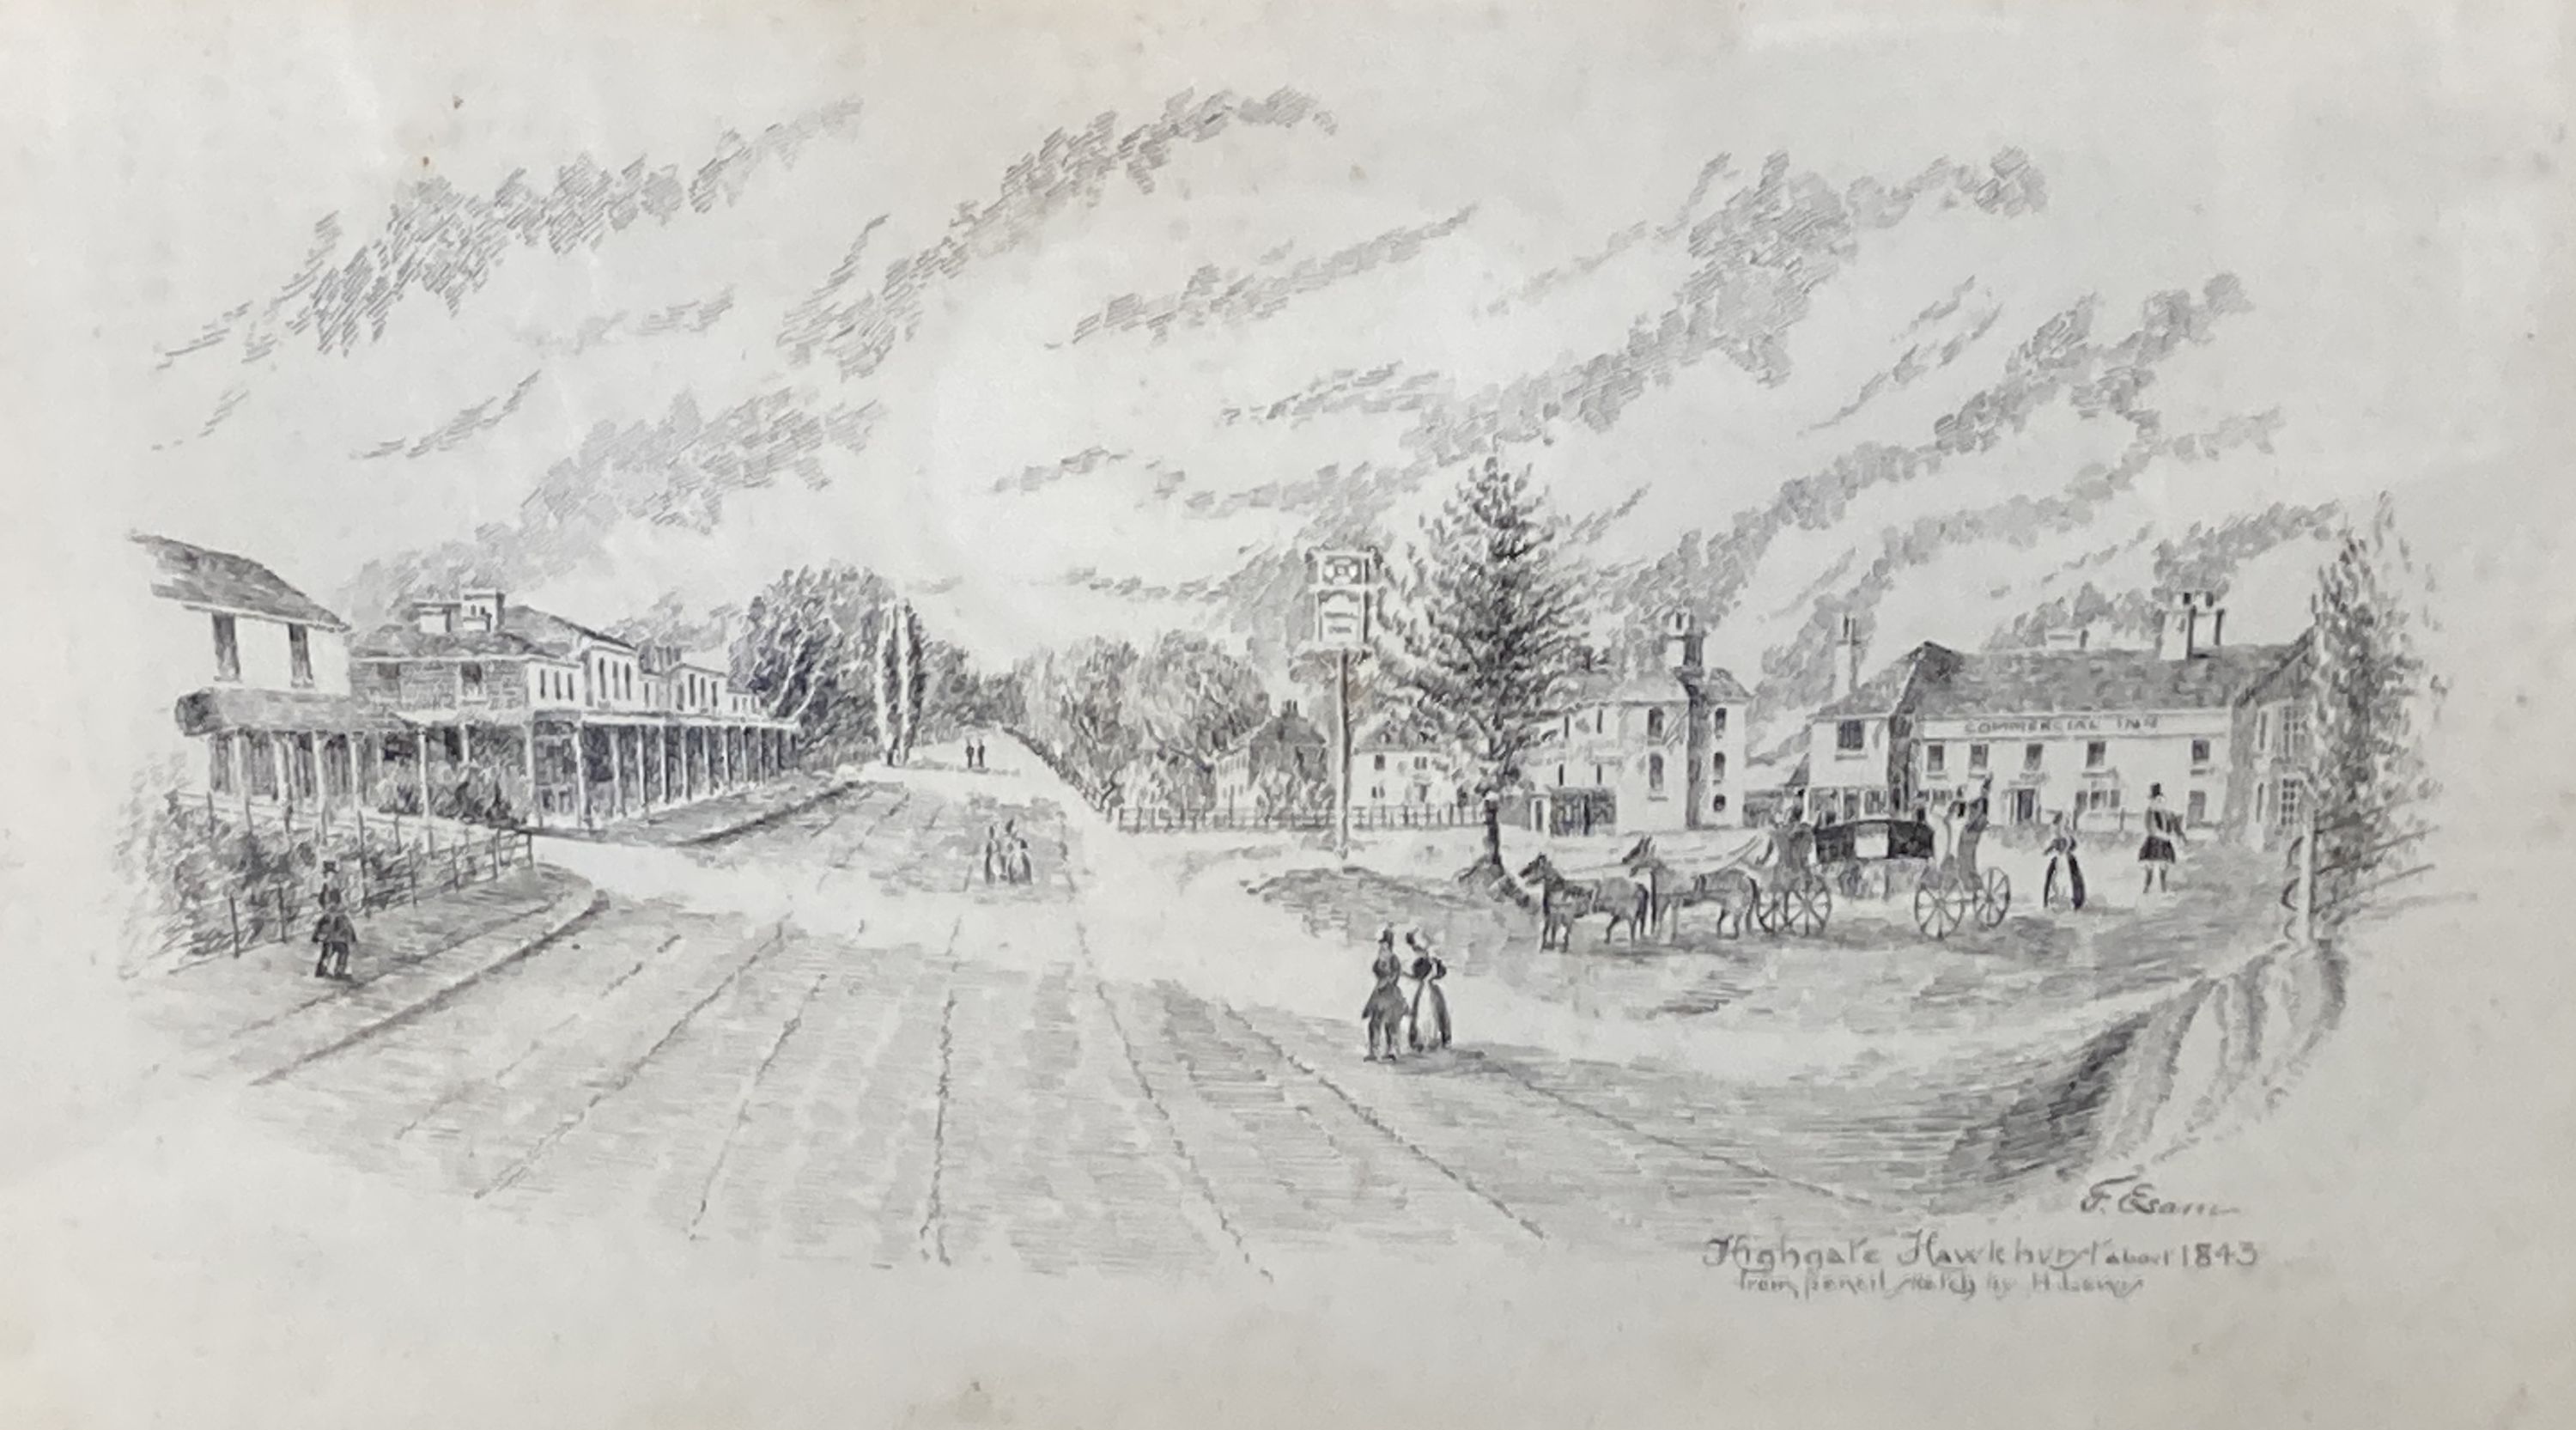 F. Esam c.1900, 5 pen and ink drawings: Highgate, Hawkhurst; Attwater; The Queen's Hotel, Hawkhurst; - Image 2 of 5